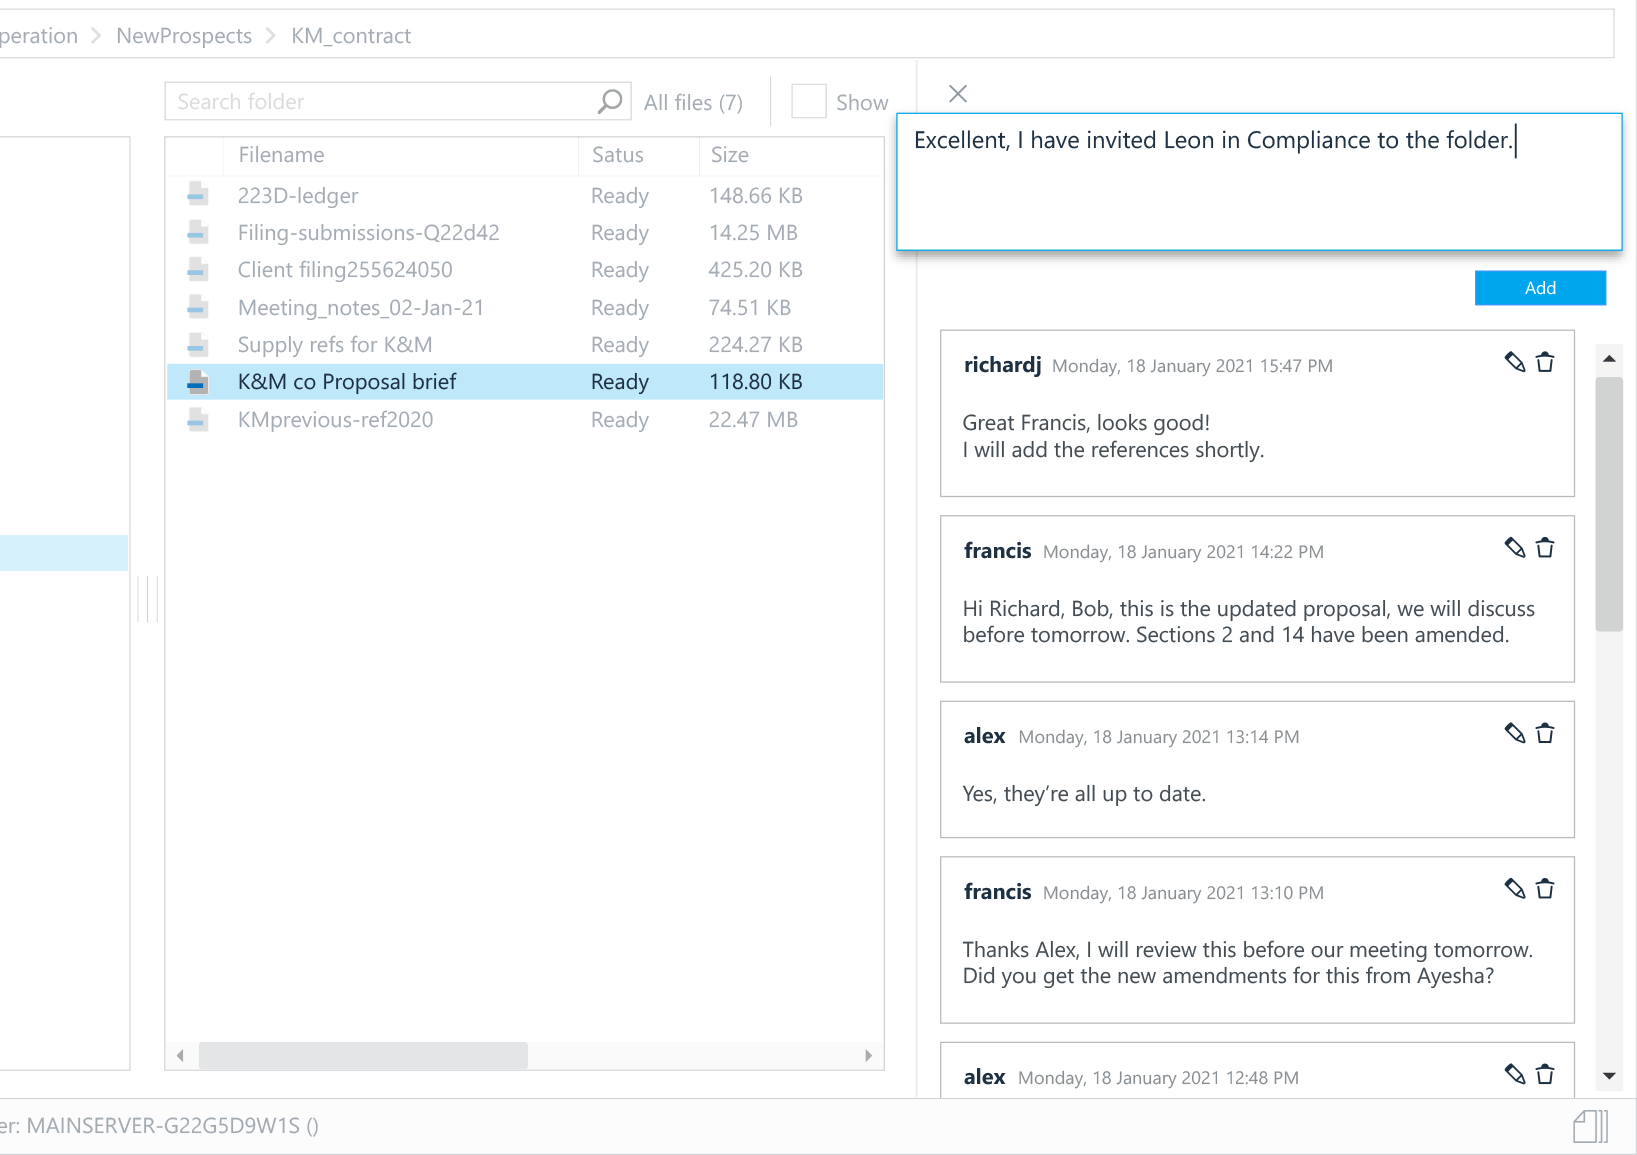 Adding comments to files that can be shared with other users to create a conversation thread.